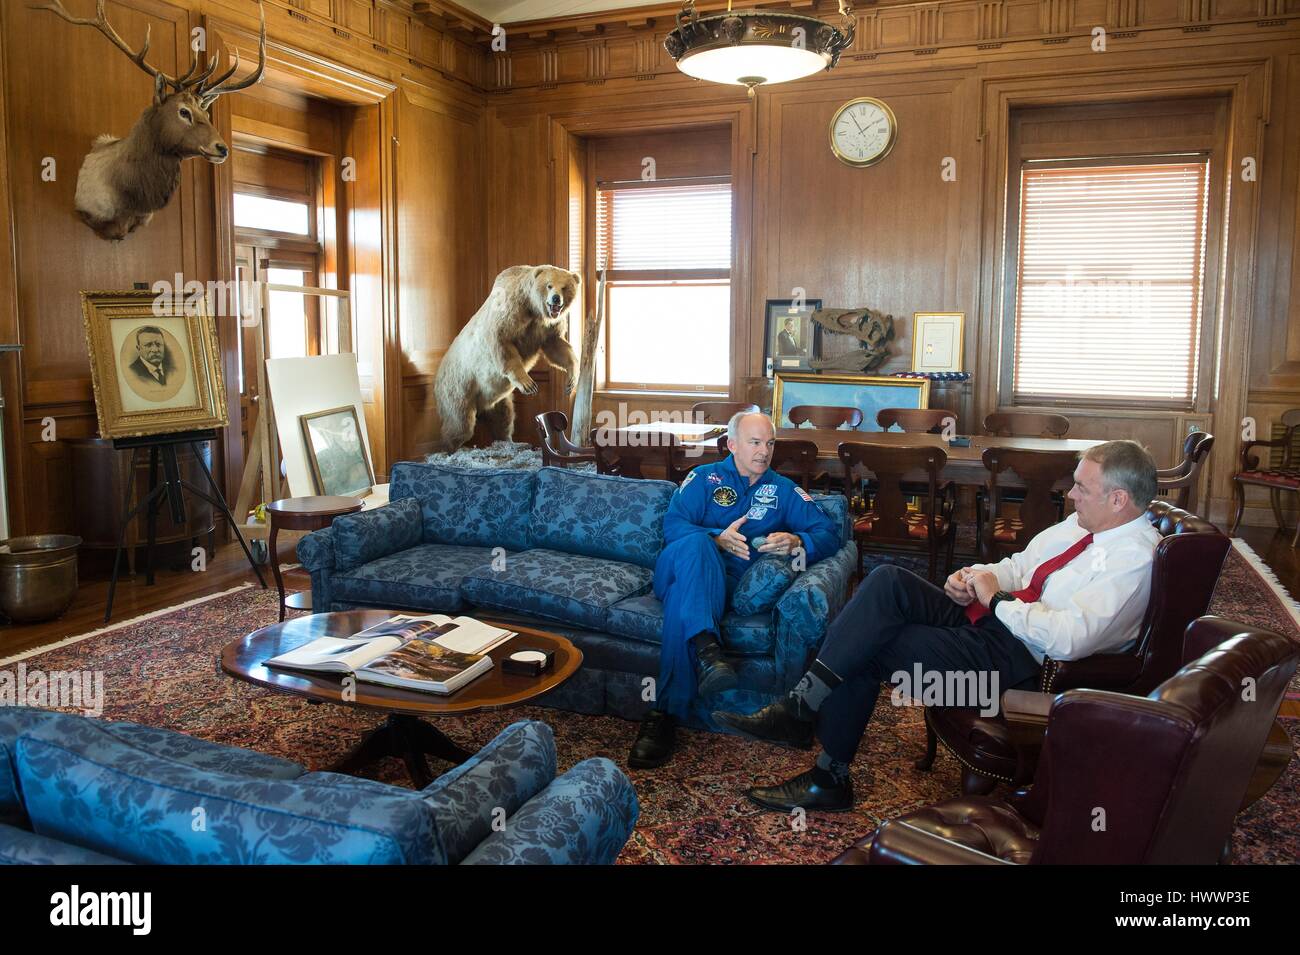 Washington, United States Of America. 23rd Mar, 2017. U.S. Secretary of the Interior Ryan Zinke, right, speaks with NASA Astronaut Jeff Williams during a visit at the U.S. Department of the Interior March 23, 2017 in Washington, DC. Williams served on Expeditions 47 and 48 and set the record for most days in space with a total of 534 days. Credit: Planetpix/Alamy Live News Stock Photo